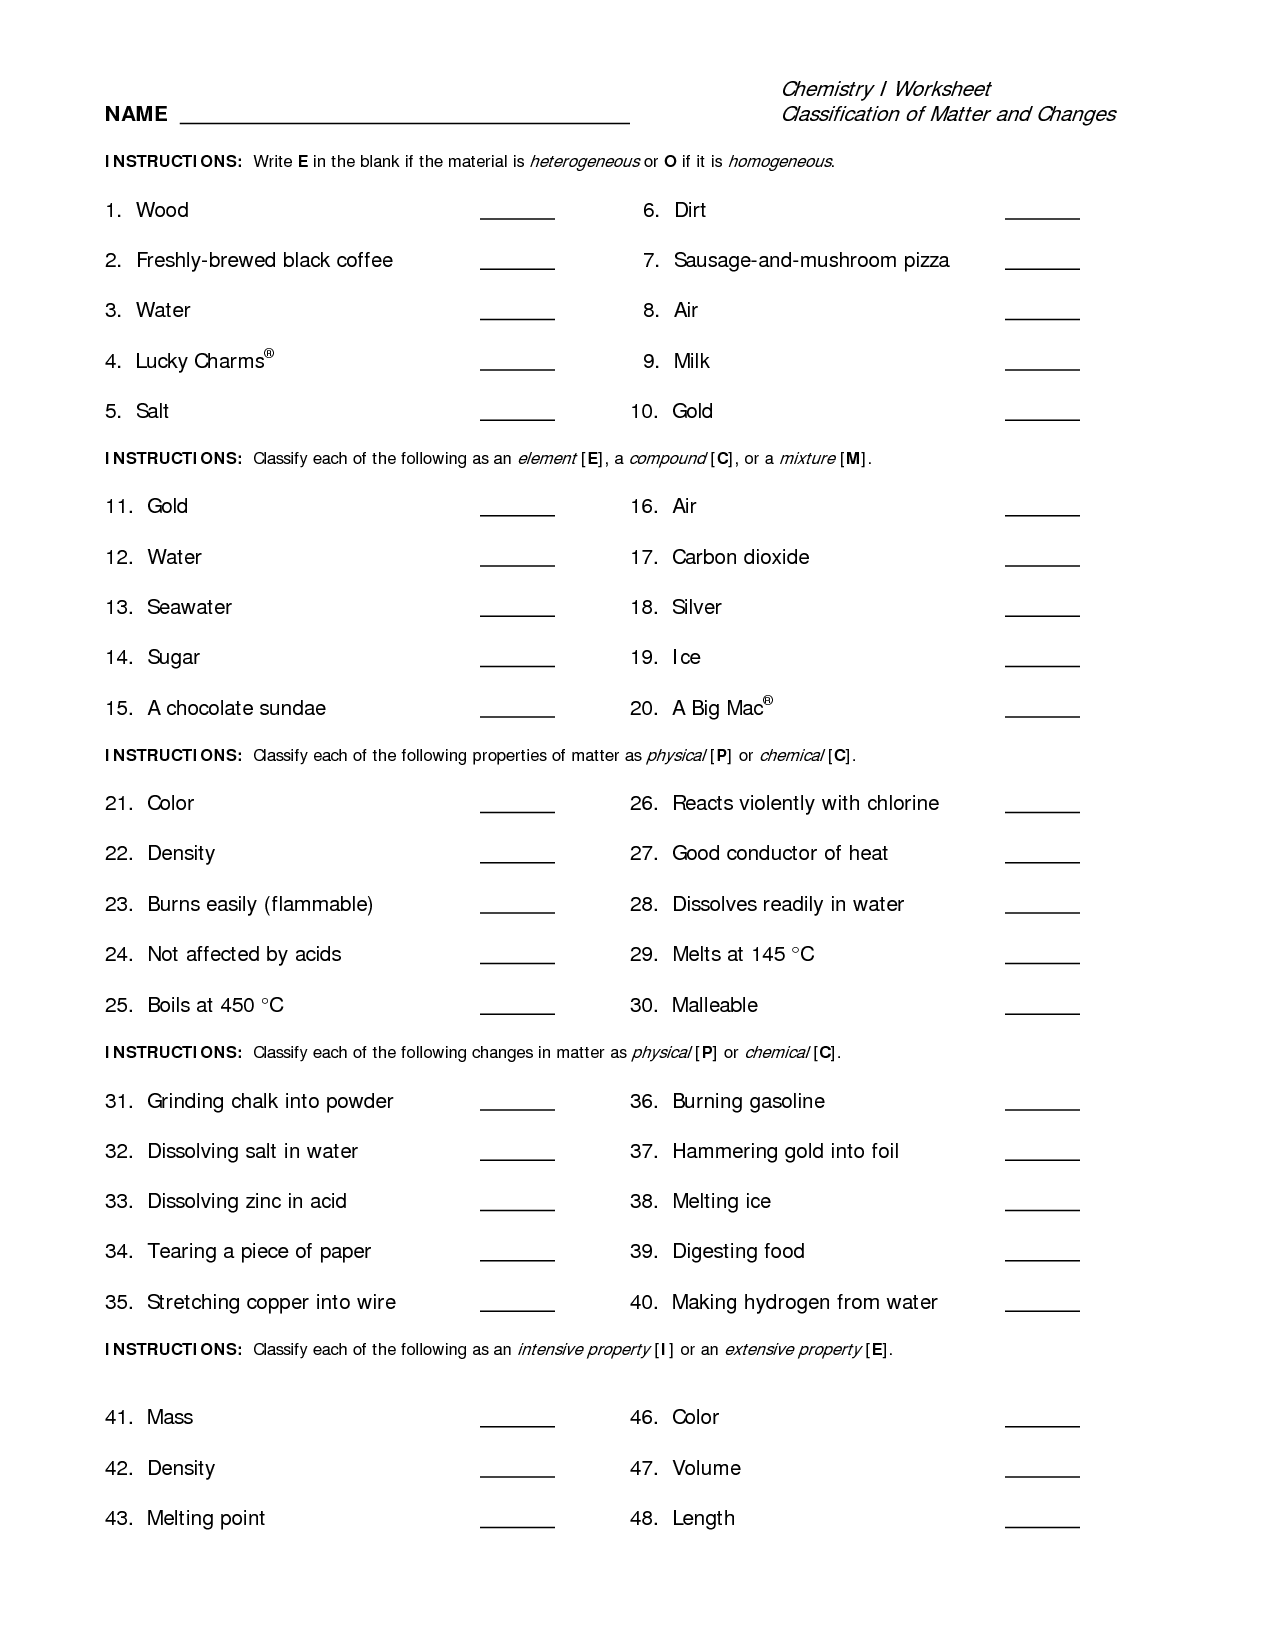 13-best-images-of-high-school-chemistry-worksheet-answers-chemistry